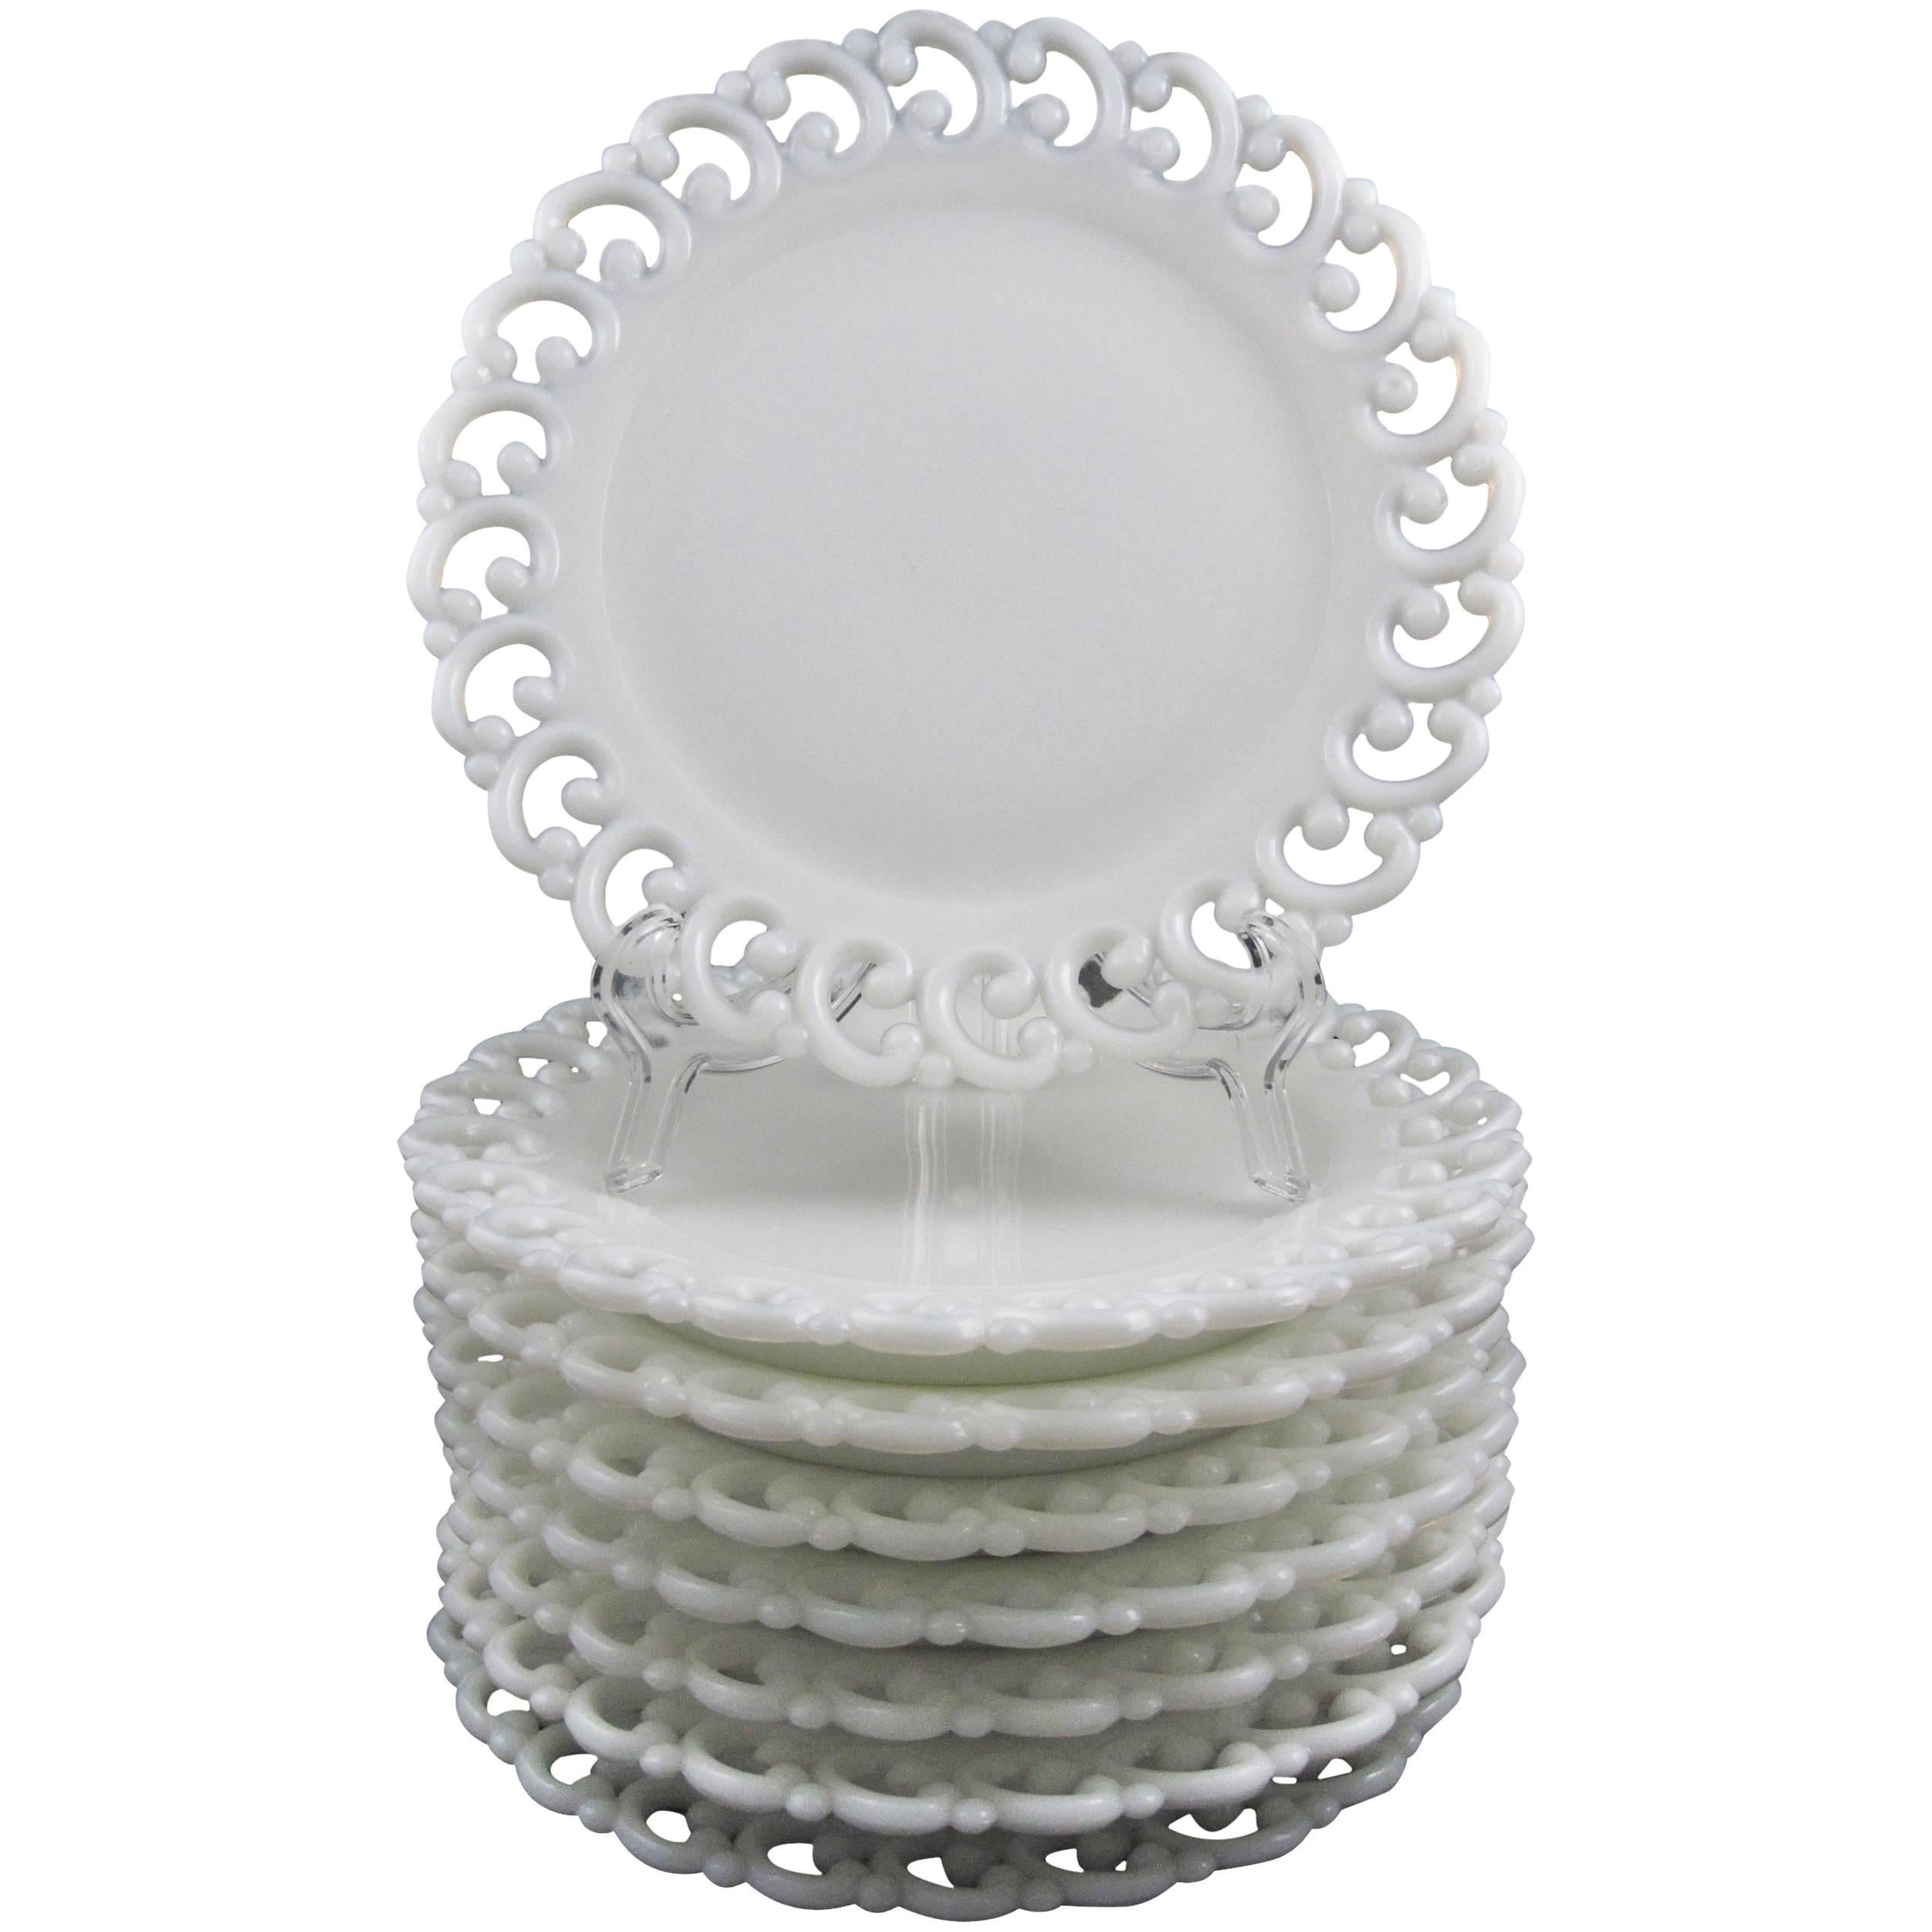 Lace Edged American Milk Glass Dinner Plates, Set of Eight